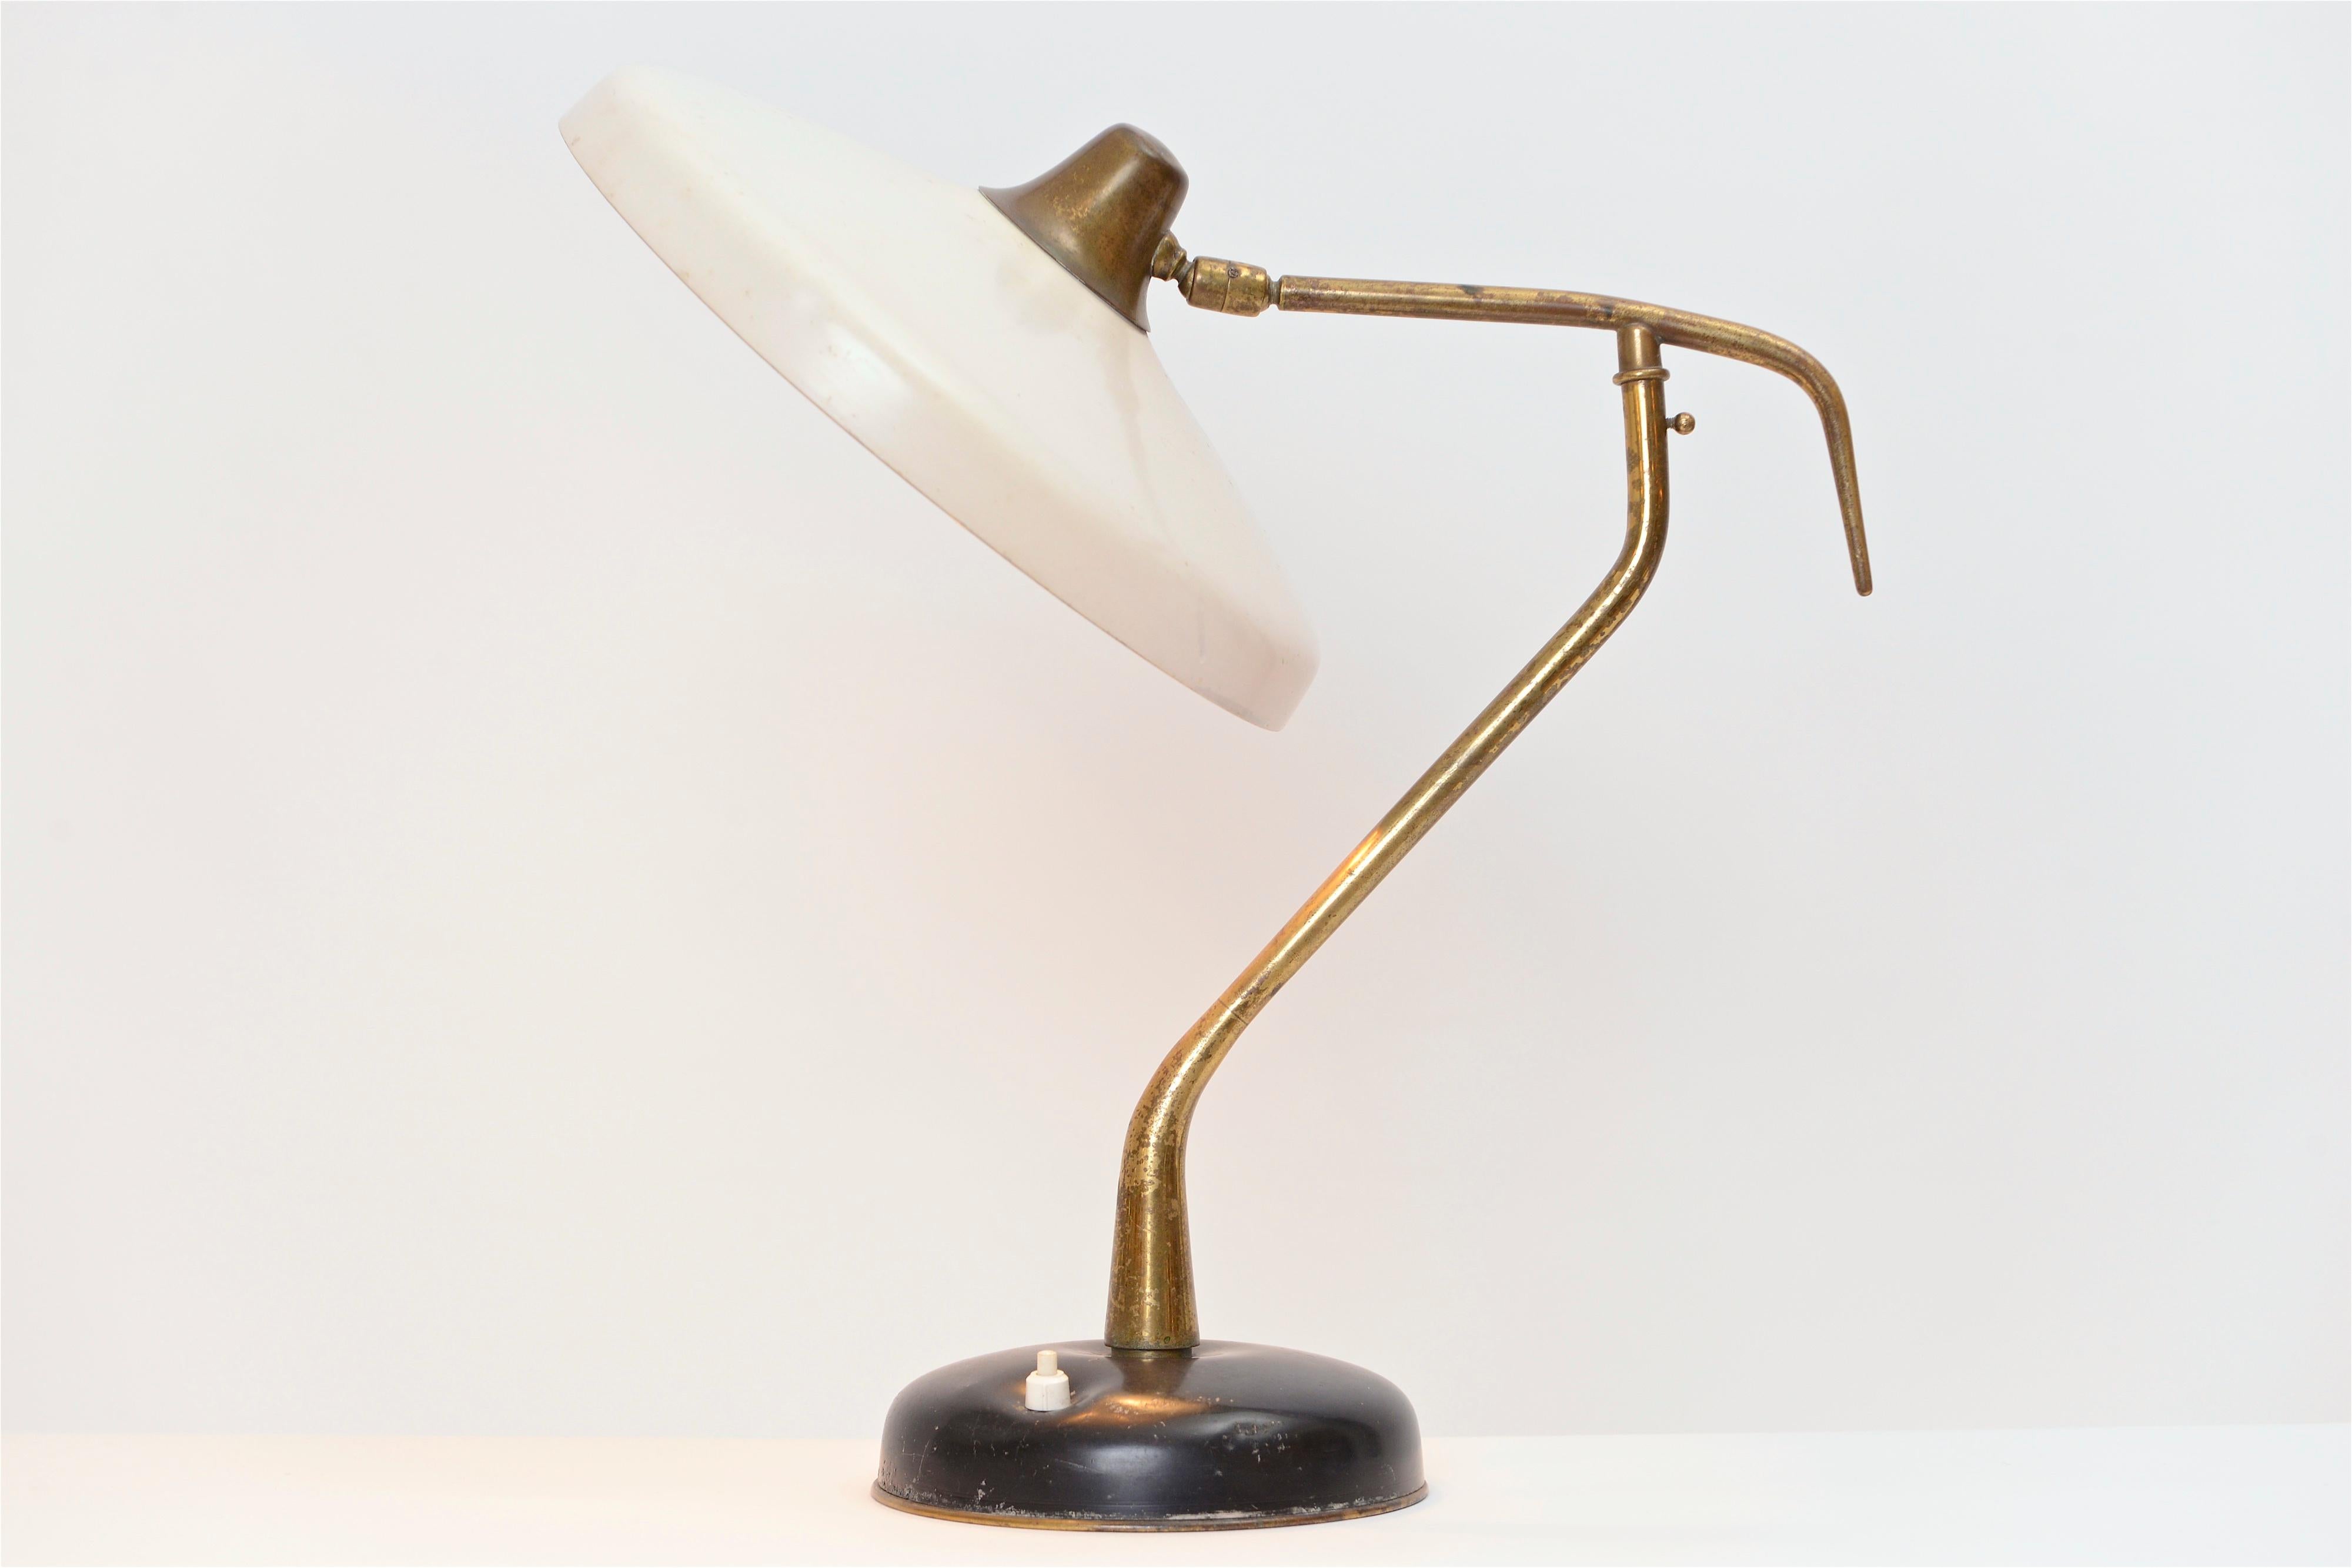 A rare 1950s brass and aluminium table or desk lamp by Oscar Torlasco. Produced by the prestigious Milanese company, Lumi, this light was manufactured using the best quality materials available at the time and remains one of Torlasco’s most classic